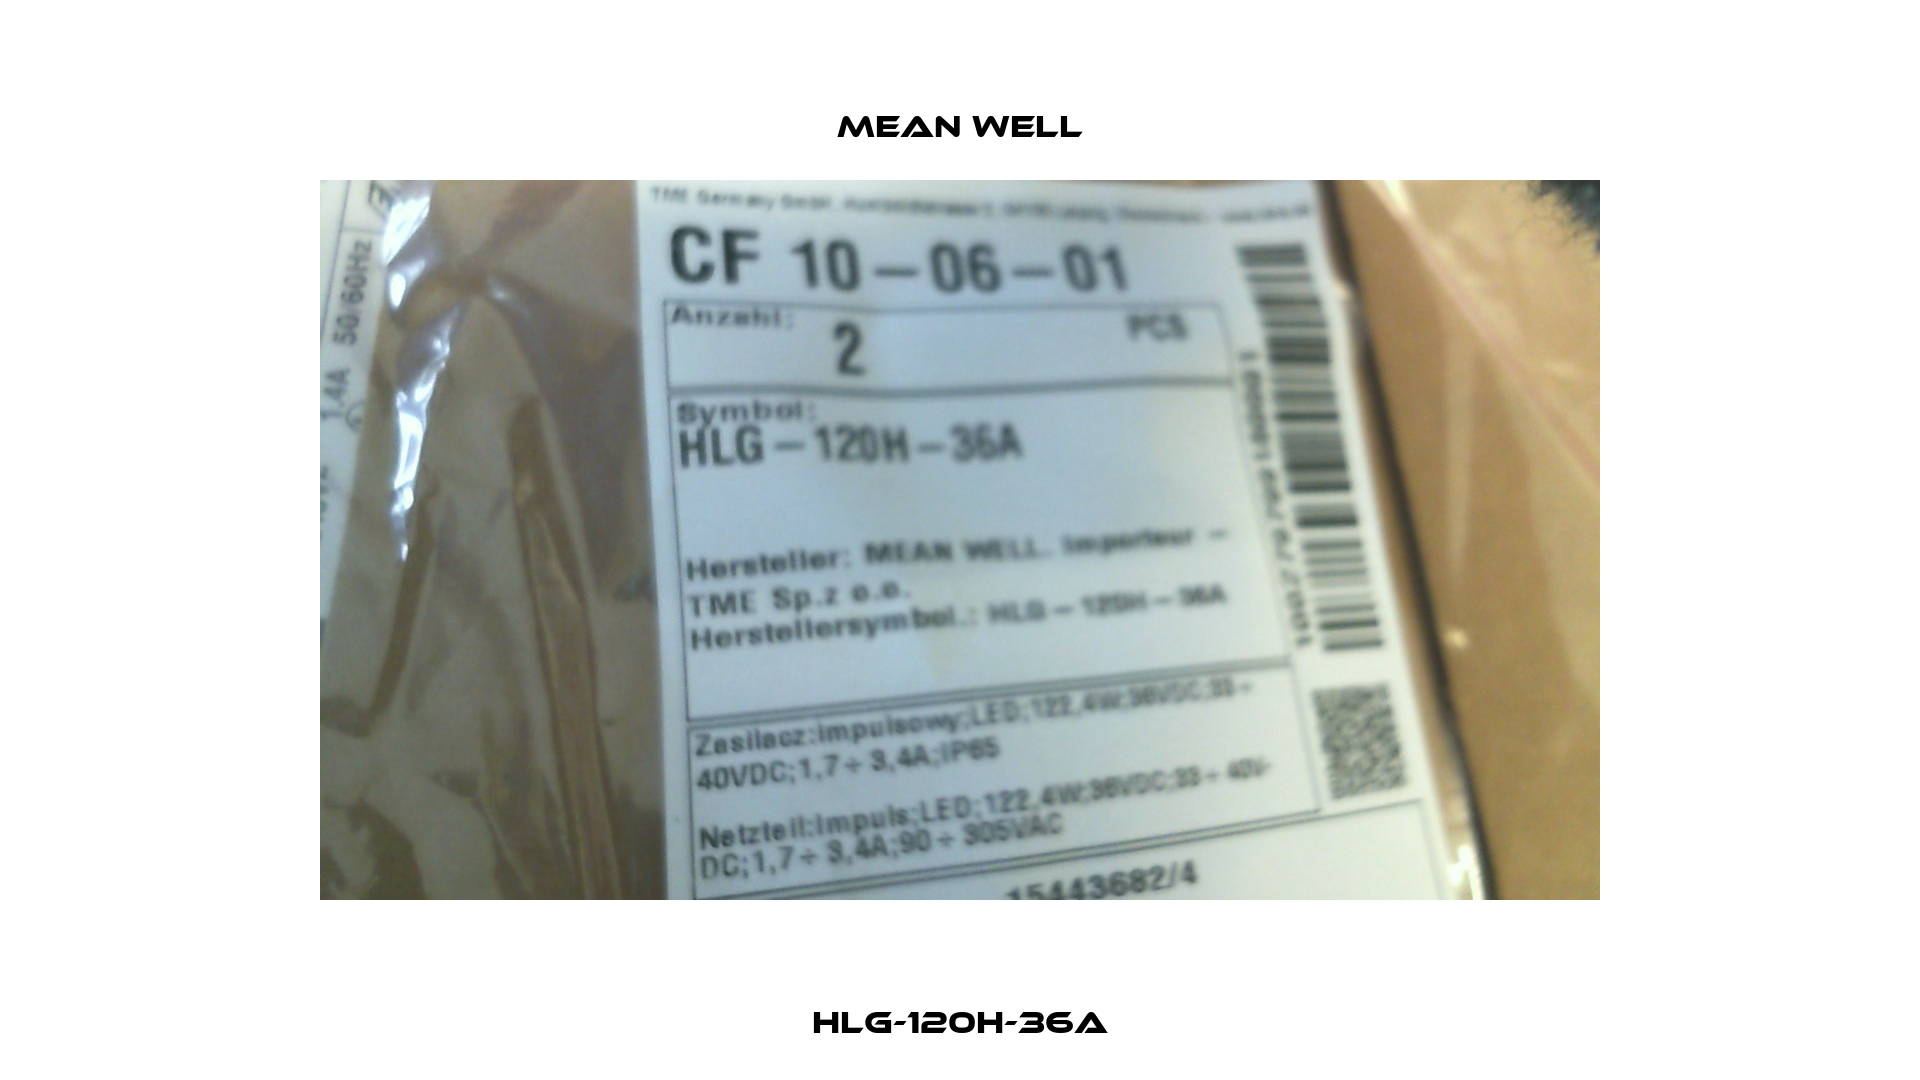 HLG-120H-36A Mean Well